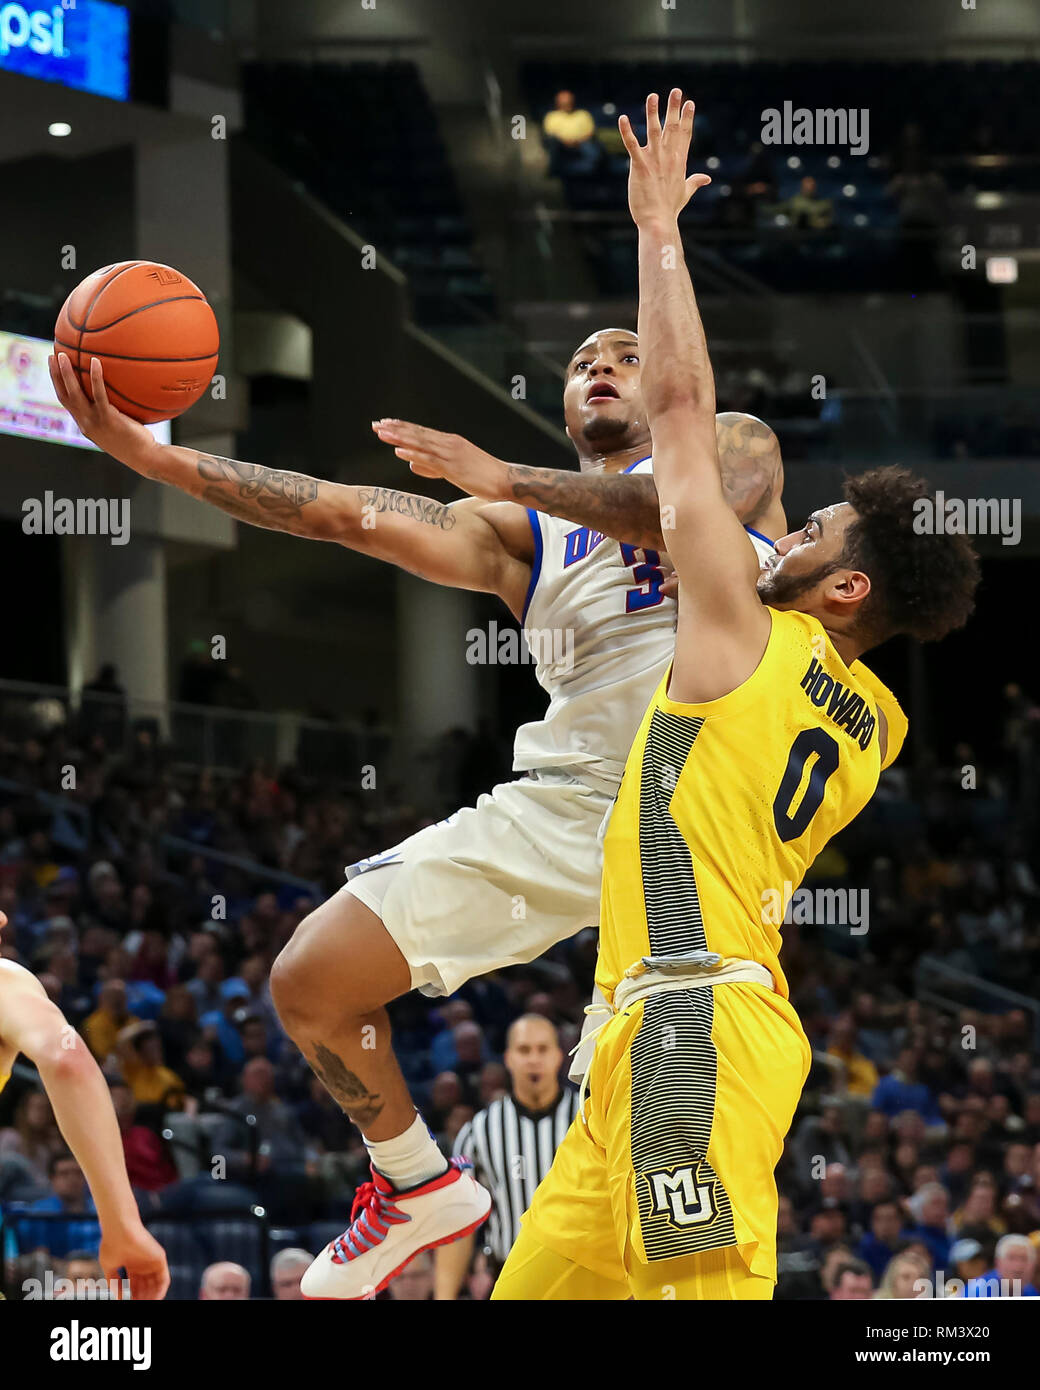 Chicago, USA. 12th Feb 2019. DePaul Blue Demons guard Devin Gage (3) puts up an acrobatic layup while being defended by Marquette Golden Eagles guard Markus Howard (0) during NCAA basketball game between the Marquette Golden Eagles and the DePaul University Blue Demons at Wintrust Arena in Chicago IL. Gary E. Duncan Sr/CSM Credit: Cal Sport Media/Alamy Live News Stock Photo